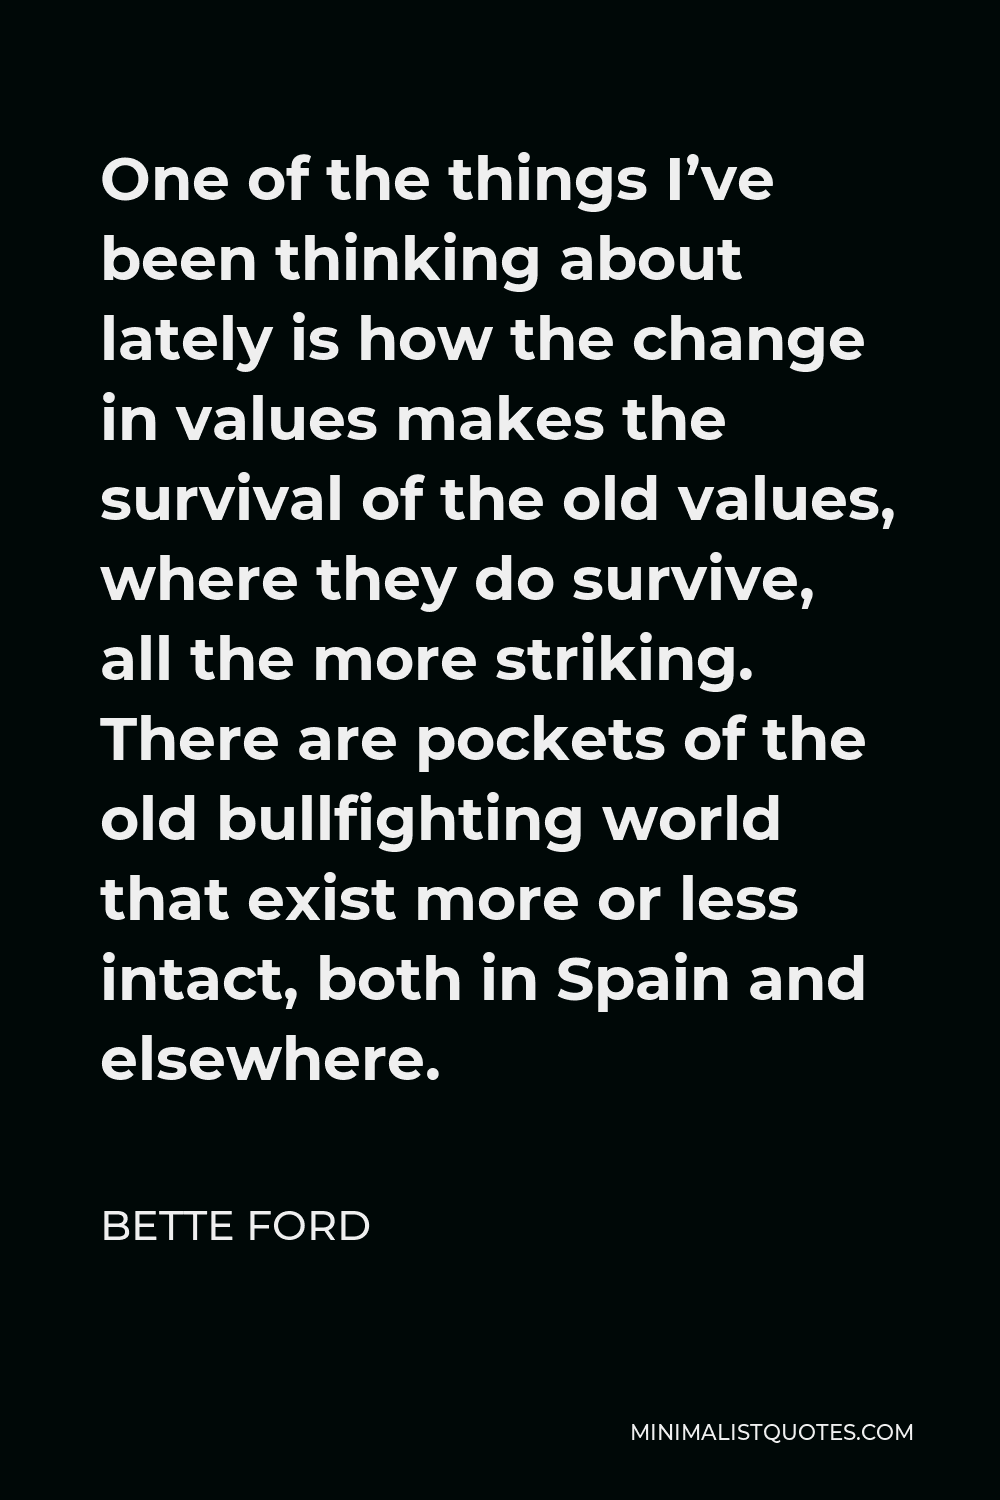 Bette Ford Quote - One of the things I’ve been thinking about lately is how the change in values makes the survival of the old values, where they do survive, all the more striking. There are pockets of the old bullfighting world that exist more or less intact, both in Spain and elsewhere.